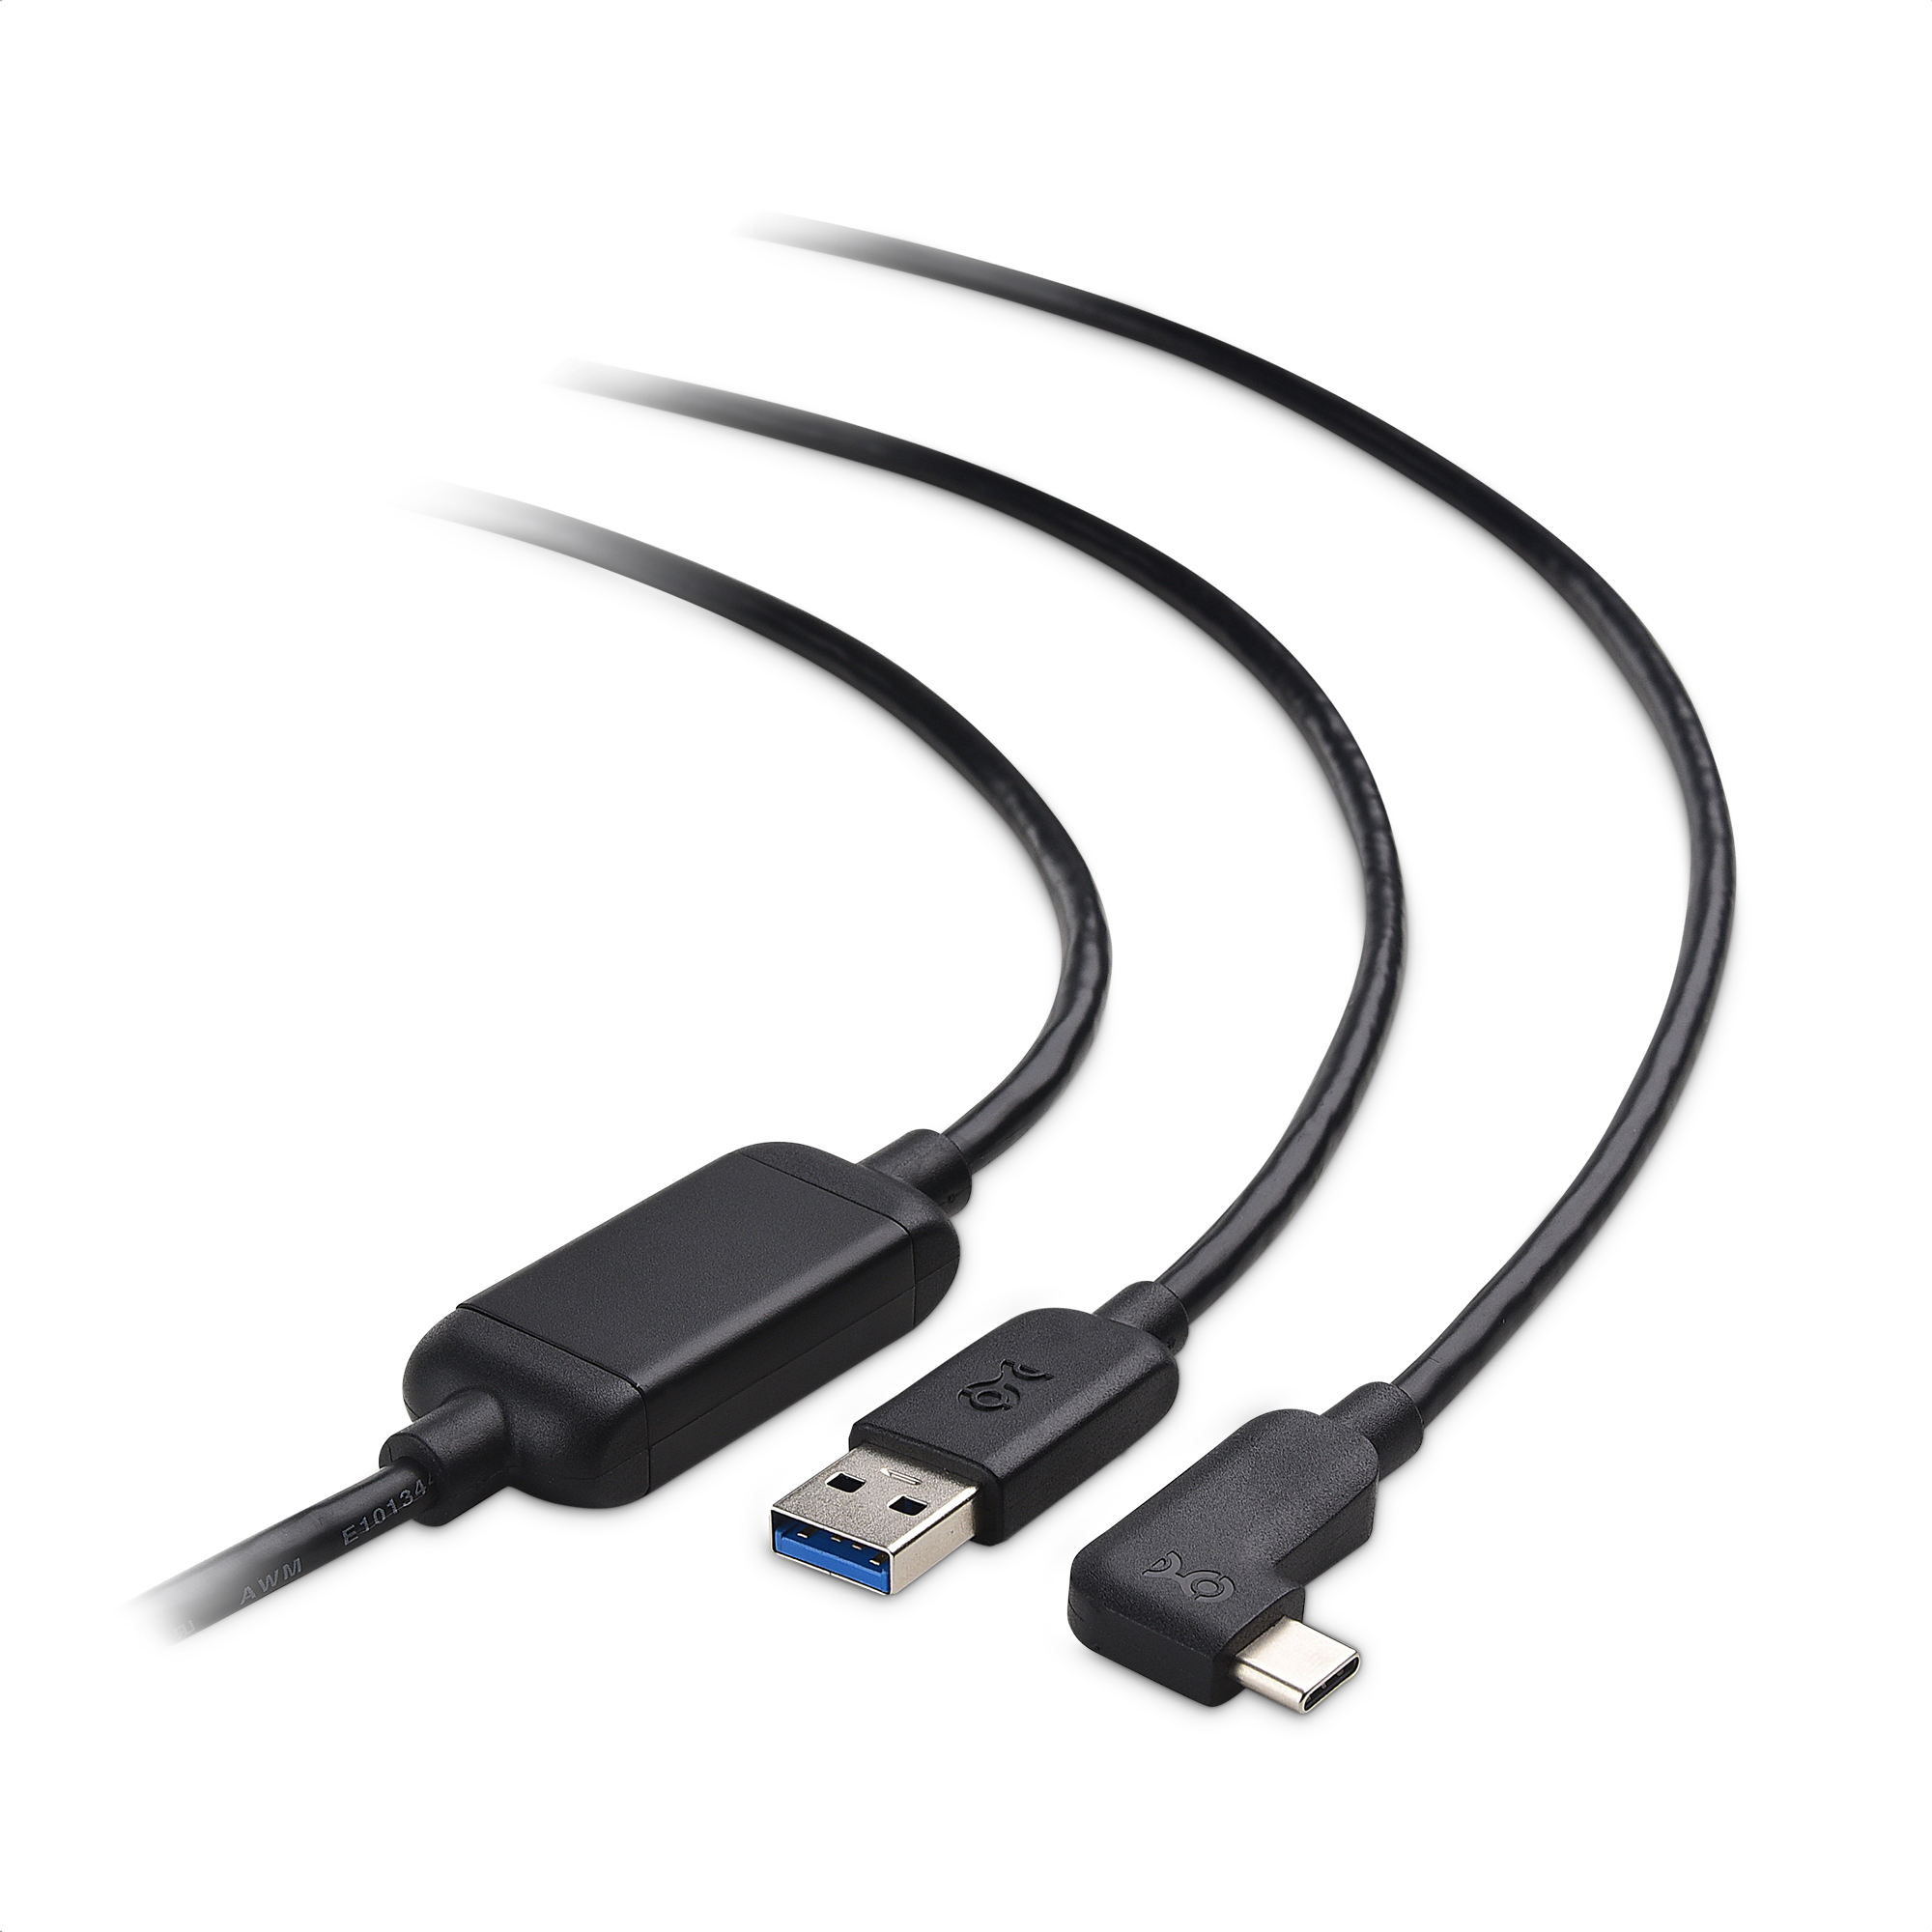 USB-C to USB-A Cable